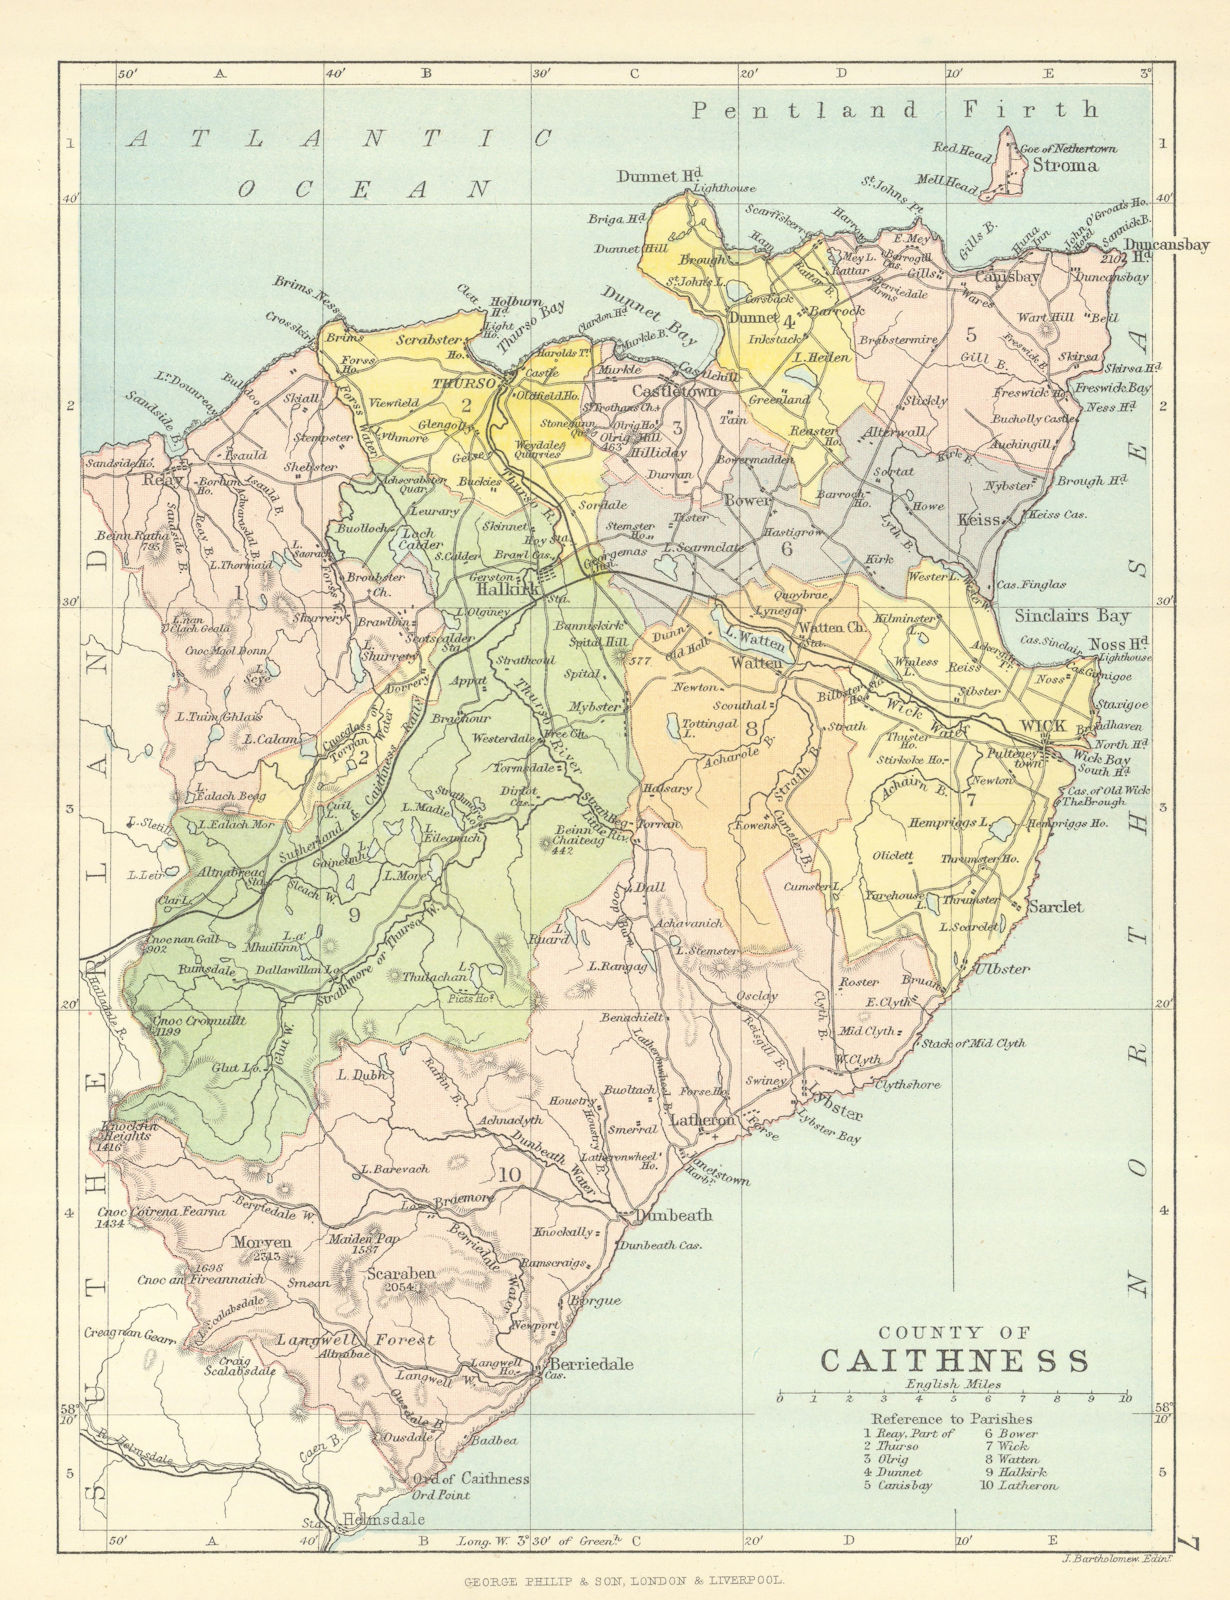 Associate Product 'County of Caithness'. Caithness-shire. Parishes. BARTHOLOMEW 1888 old map